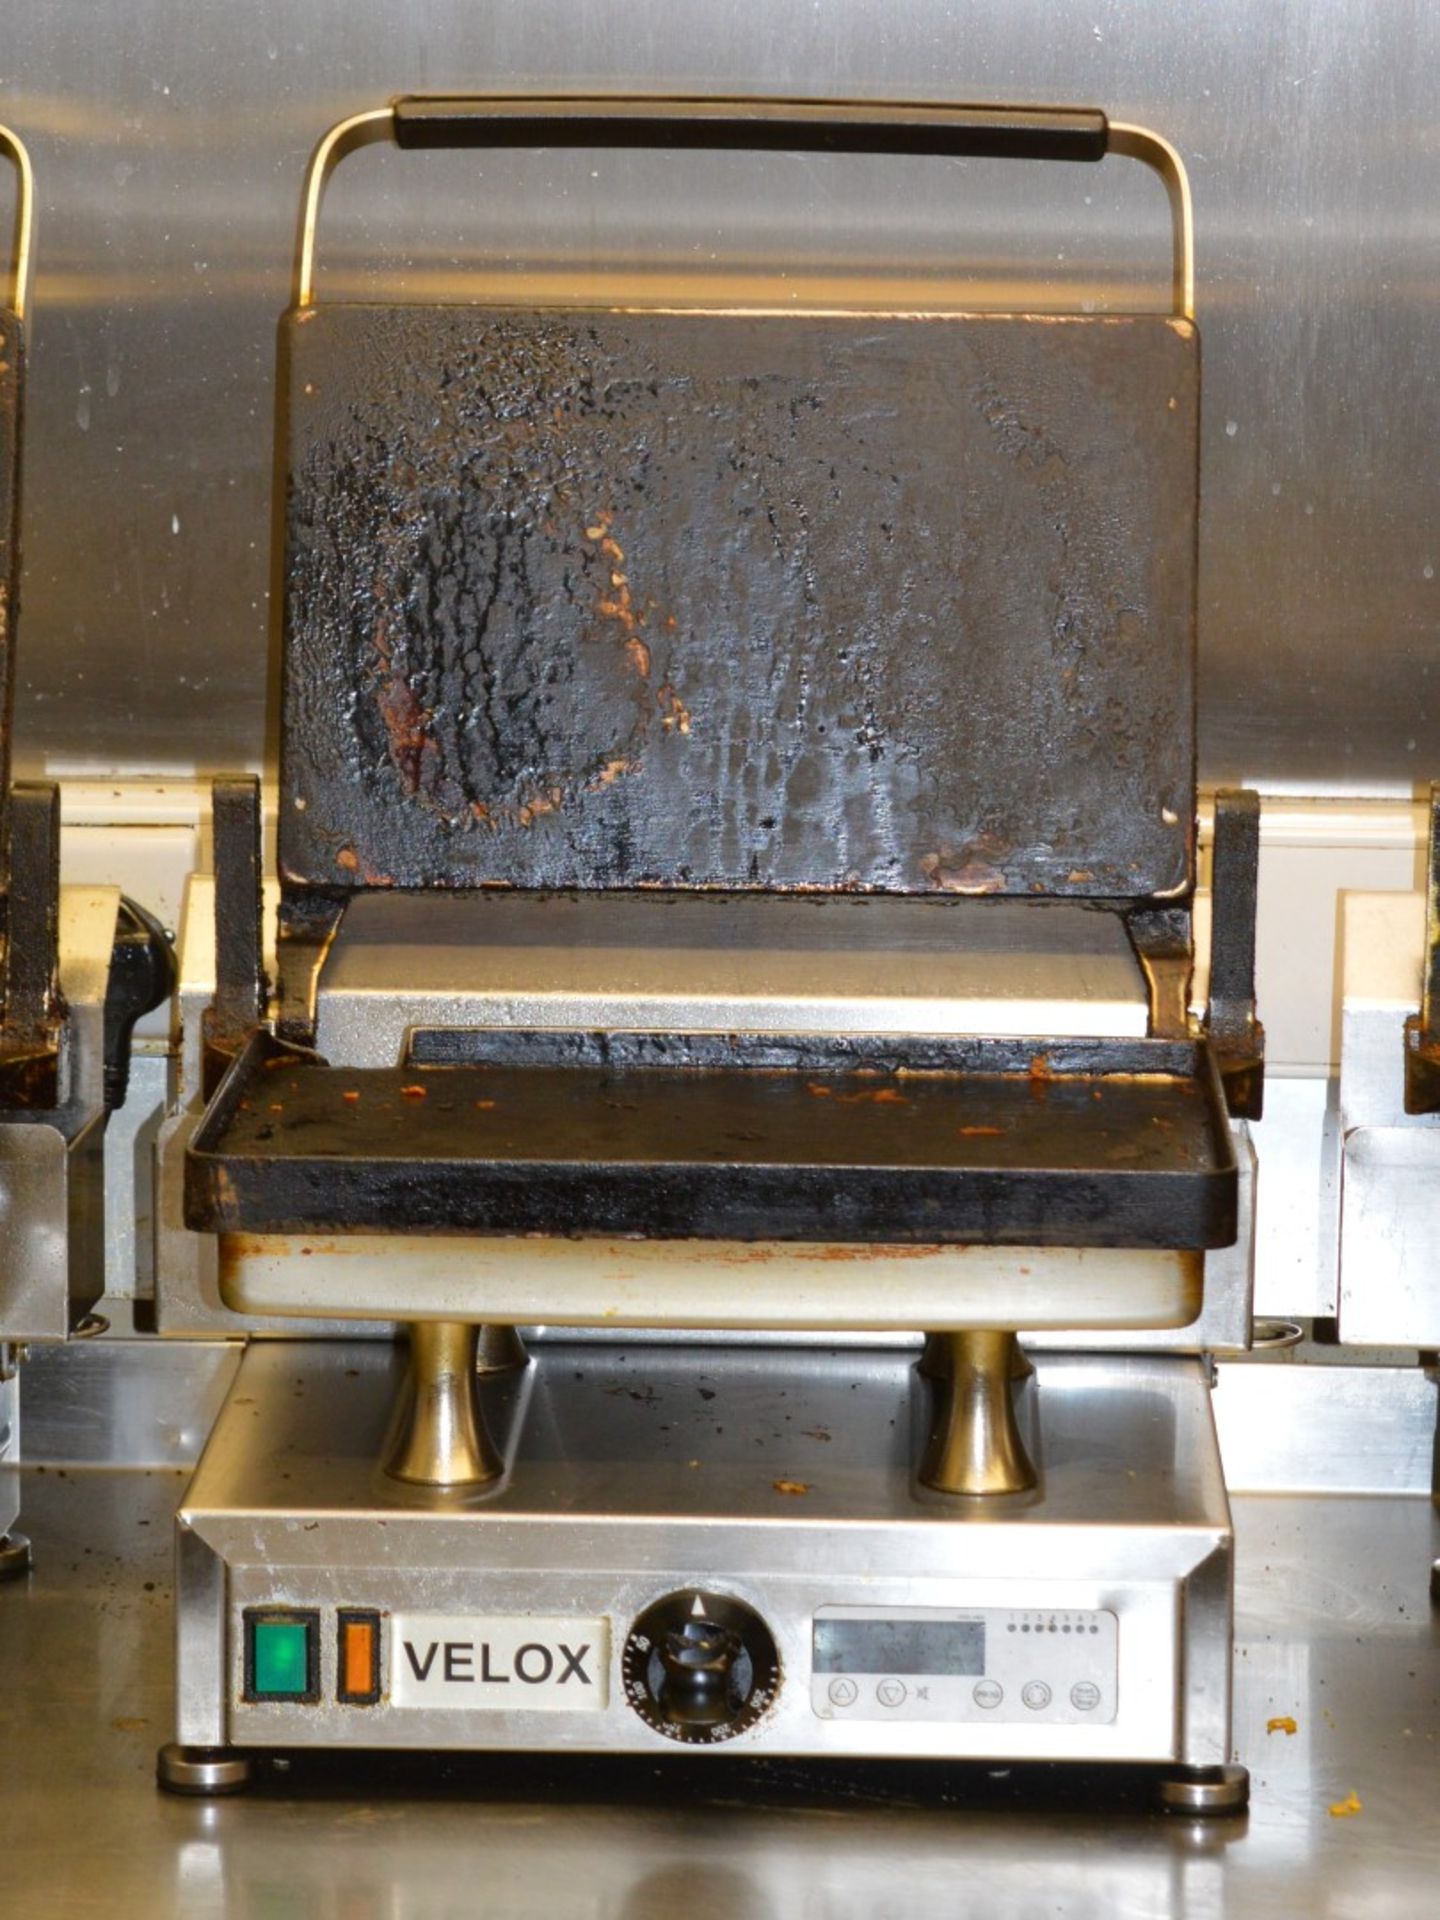 1 x Silesia Velox CG1 Single High Speed Contact Grill - Takes Just 6 Minutes to Reach Cooking - Image 2 of 3